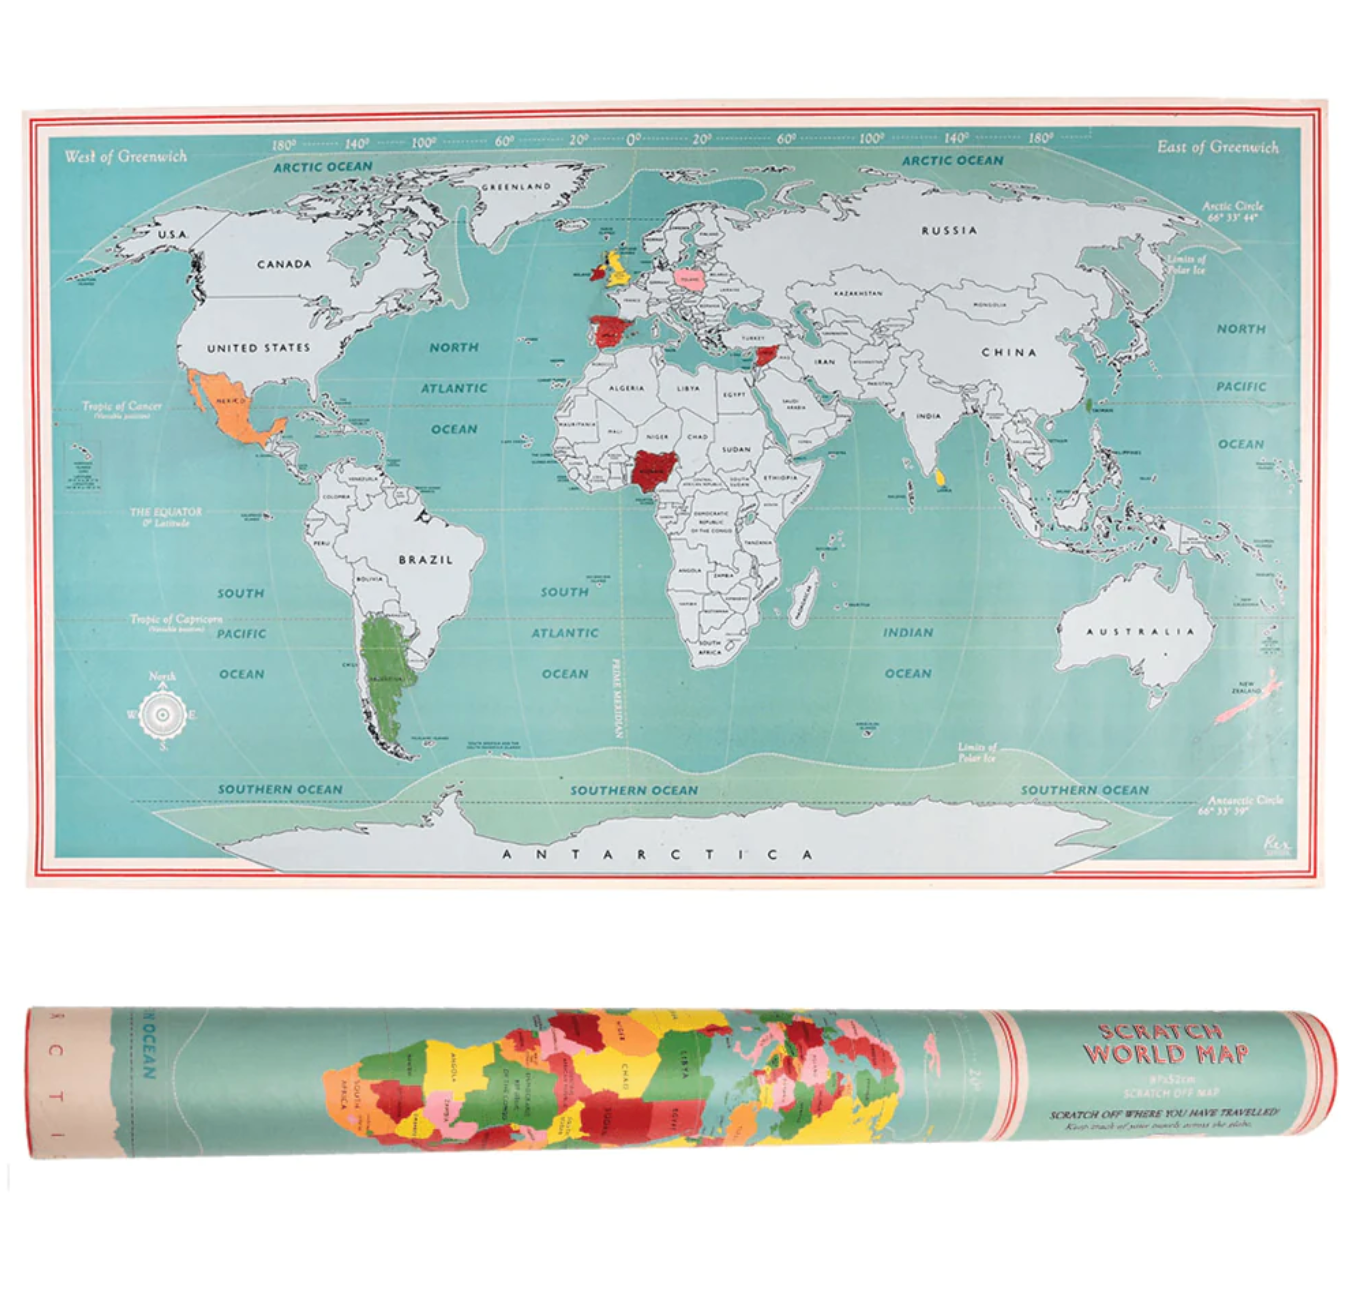 Vintage world map - DIY scratch and customise map